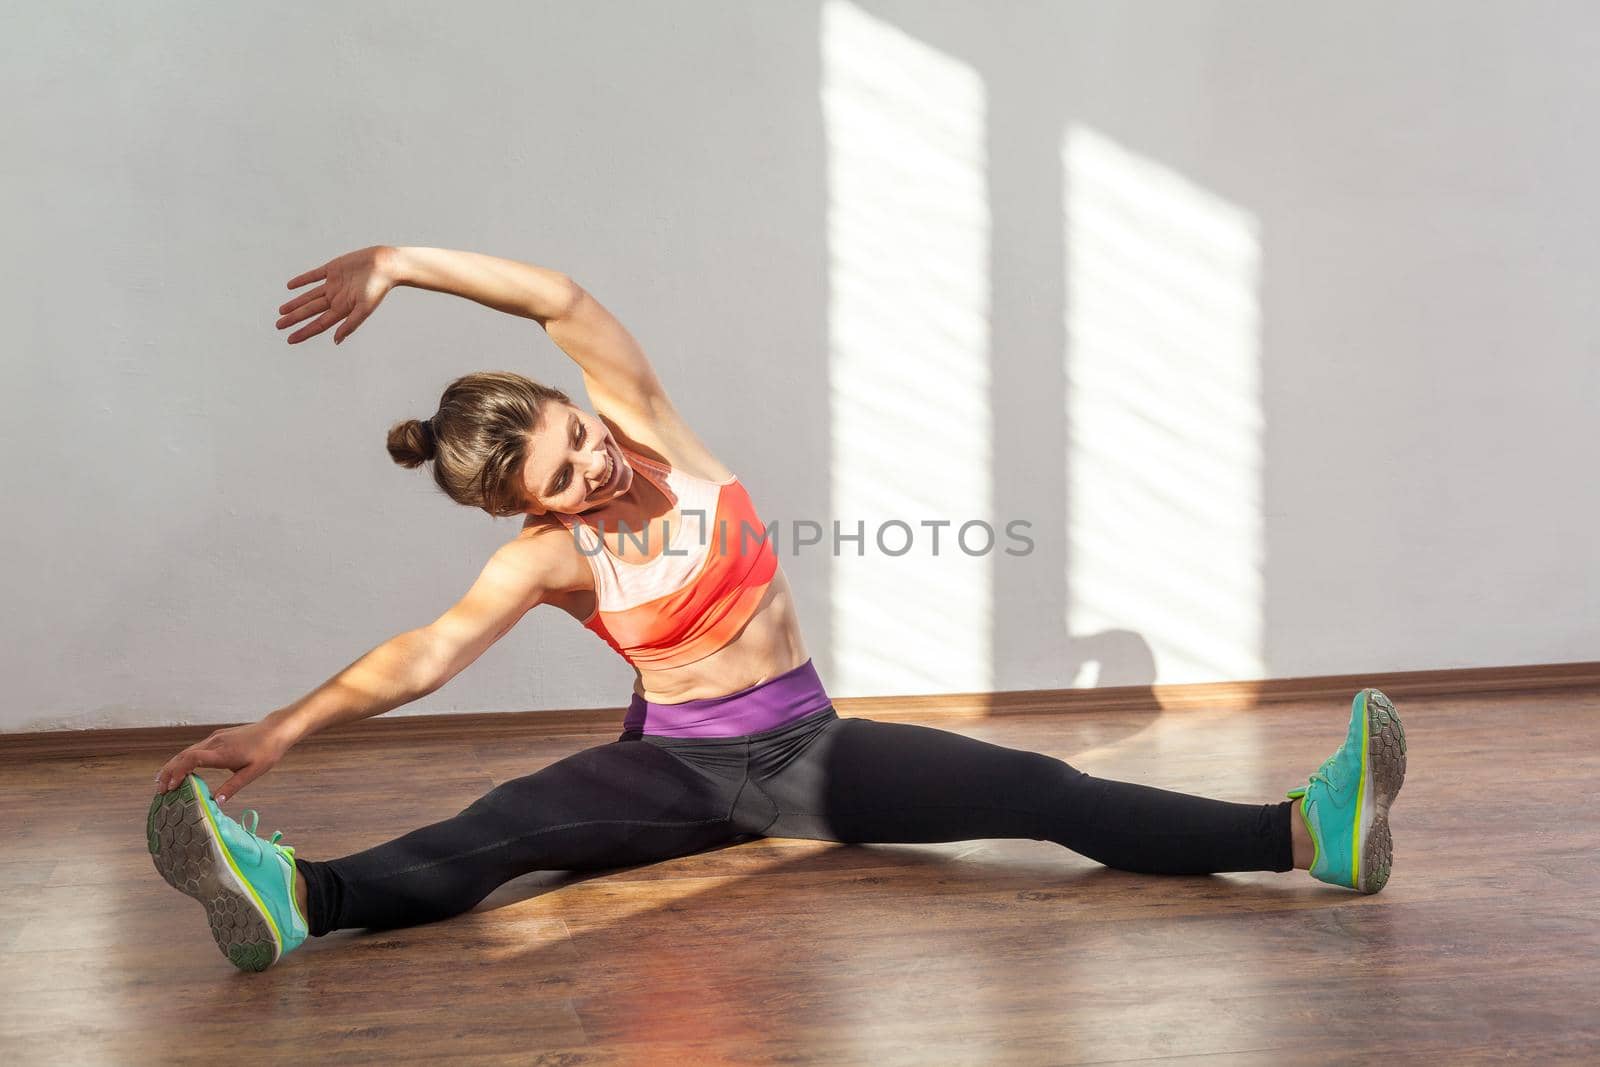 Beginner doing workouts. cheerful woman with bun hairstyle and in sportswear trying to do side bends while sitting on floor, practicing at home. indoor studio shot illuminated by sunlight from window